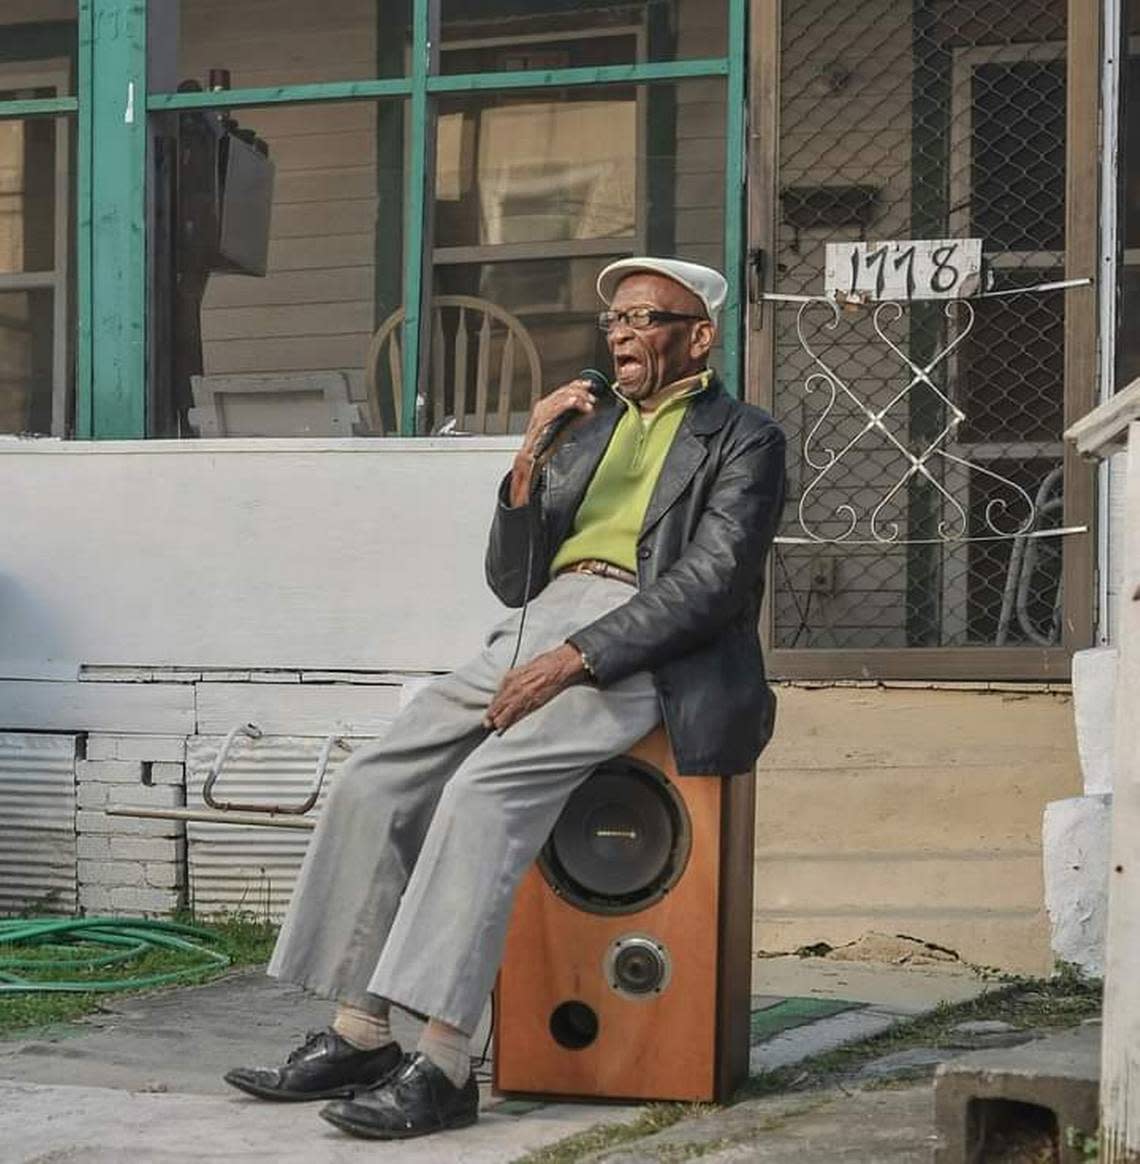 Buddy Barron sings while sitting on a speaker as part of the Macon Music Project, a photography documentary started by his grandson Dsto Moore. Courtesy Dsto Moore